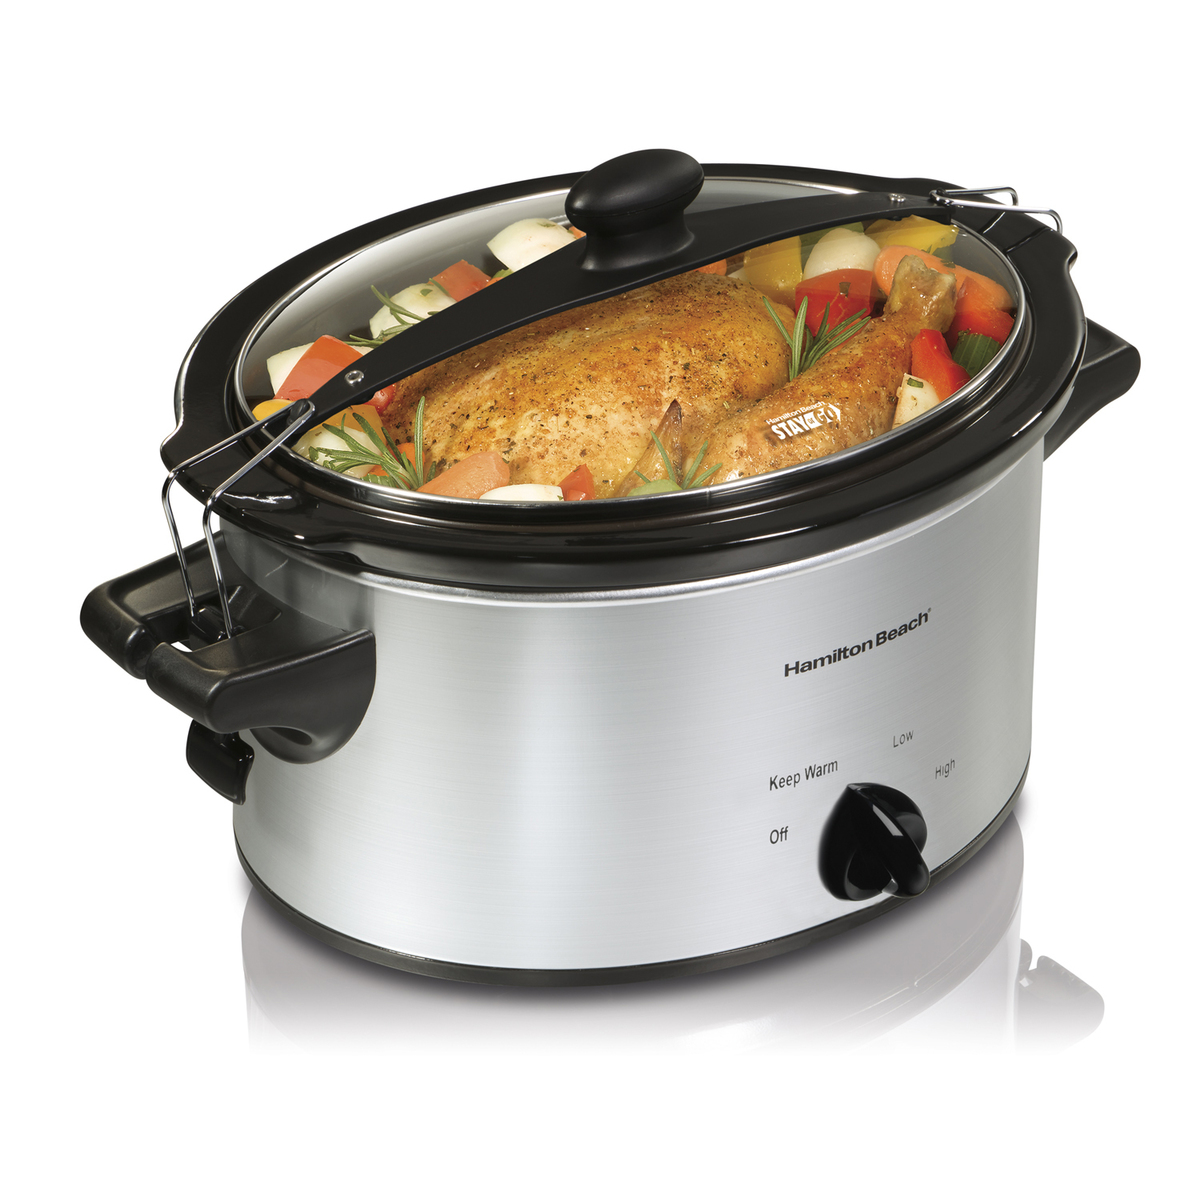 Stay or Go® 4 Quart Slow Cooker (33249)